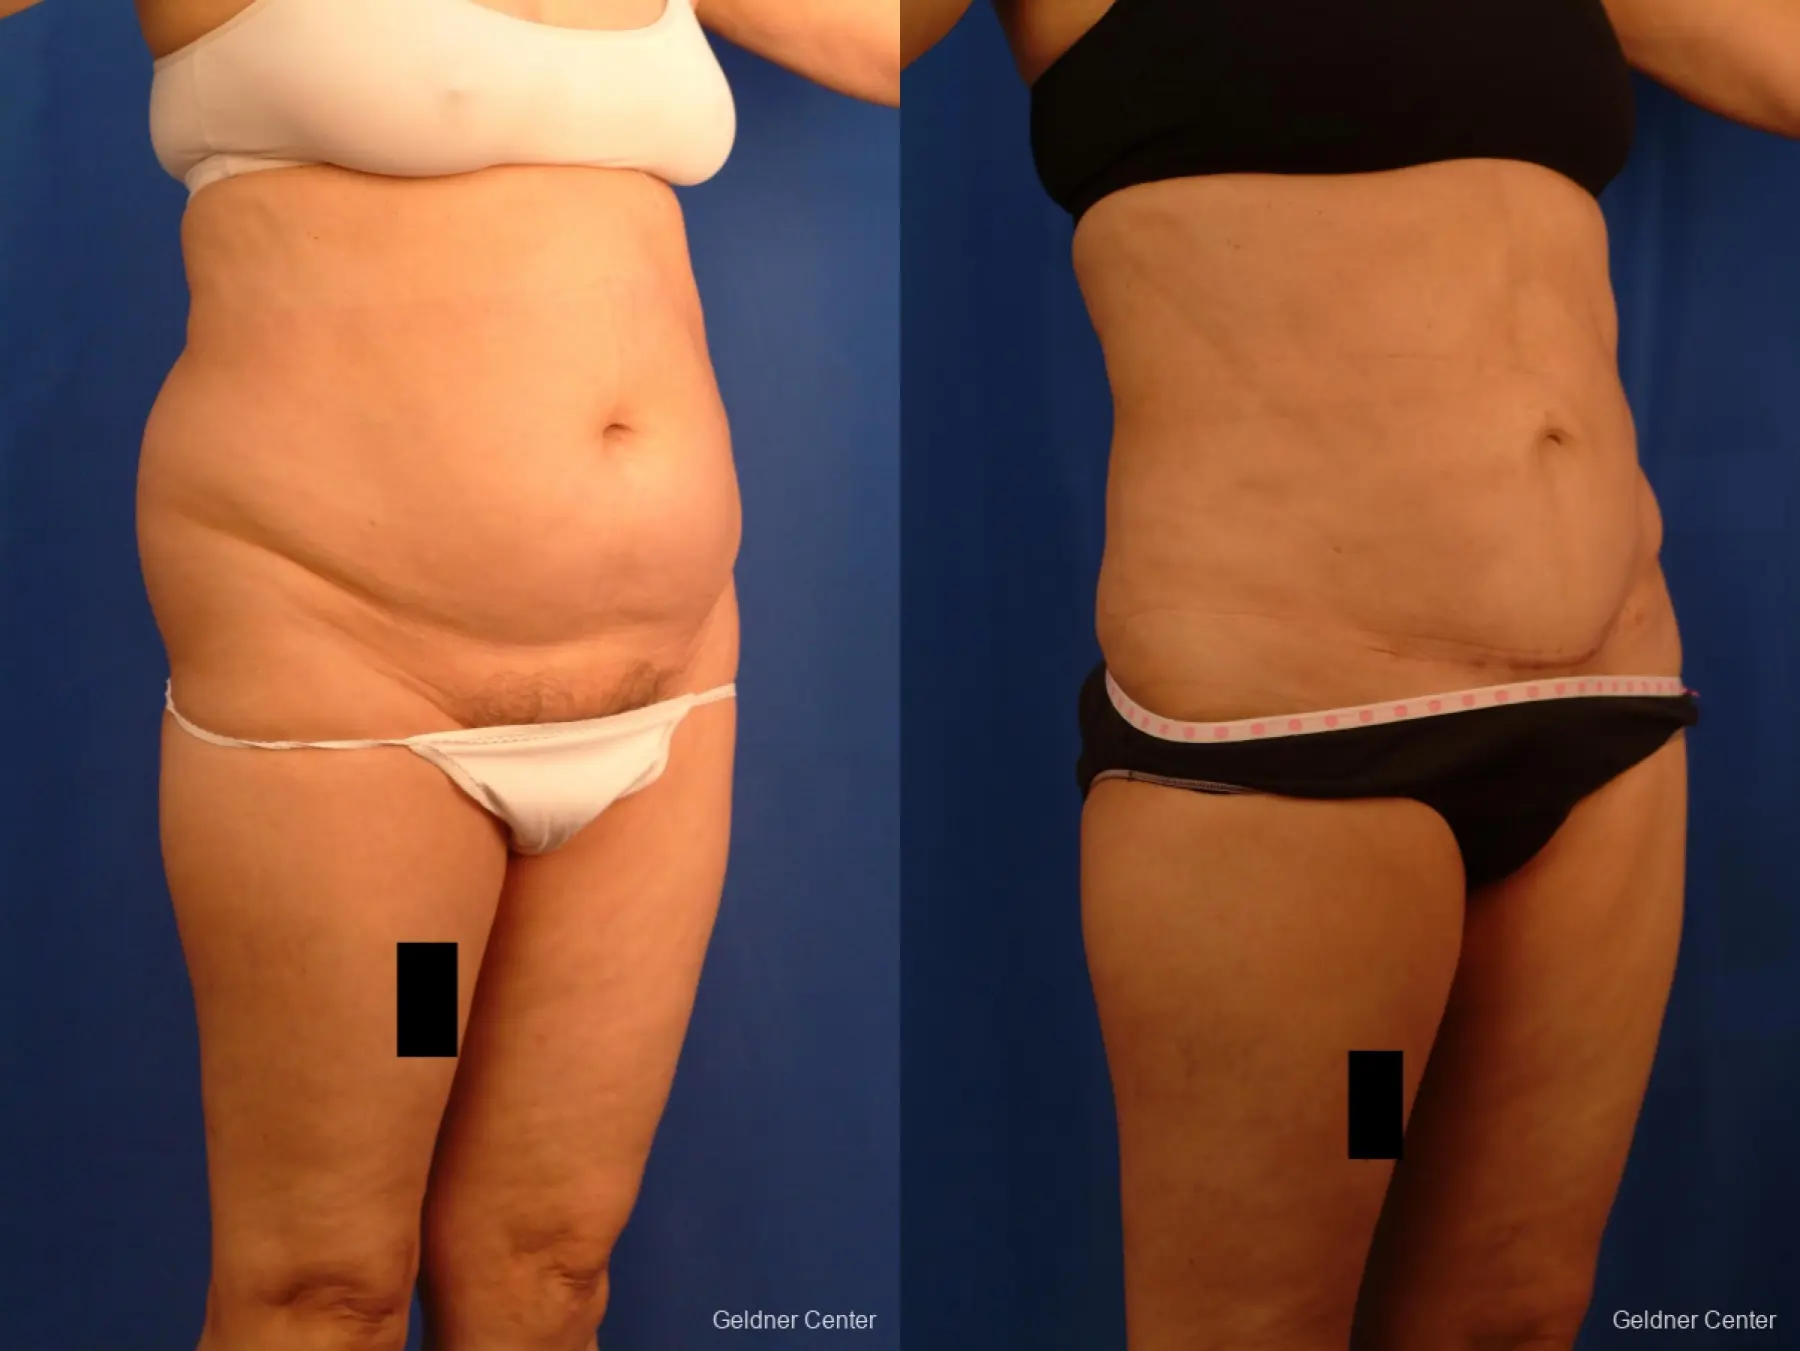 Vaser lipo patient 2536 before and after photos - Before and After 3